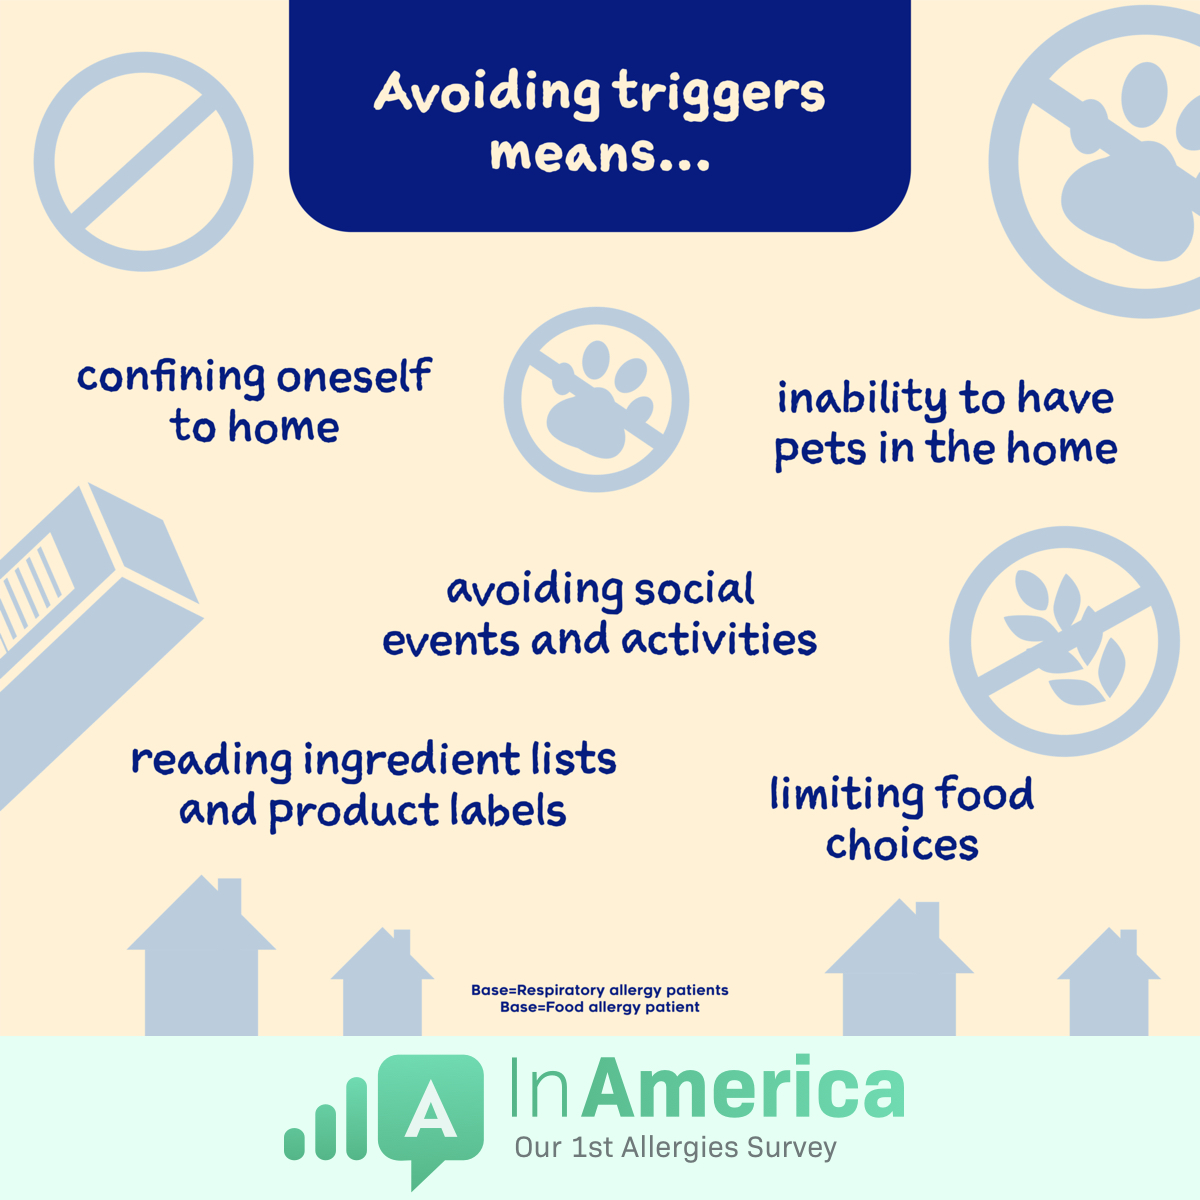 People avoid triggers by staying home, avoiding events, reading product labels, limiting food choices, and avoiding pets.